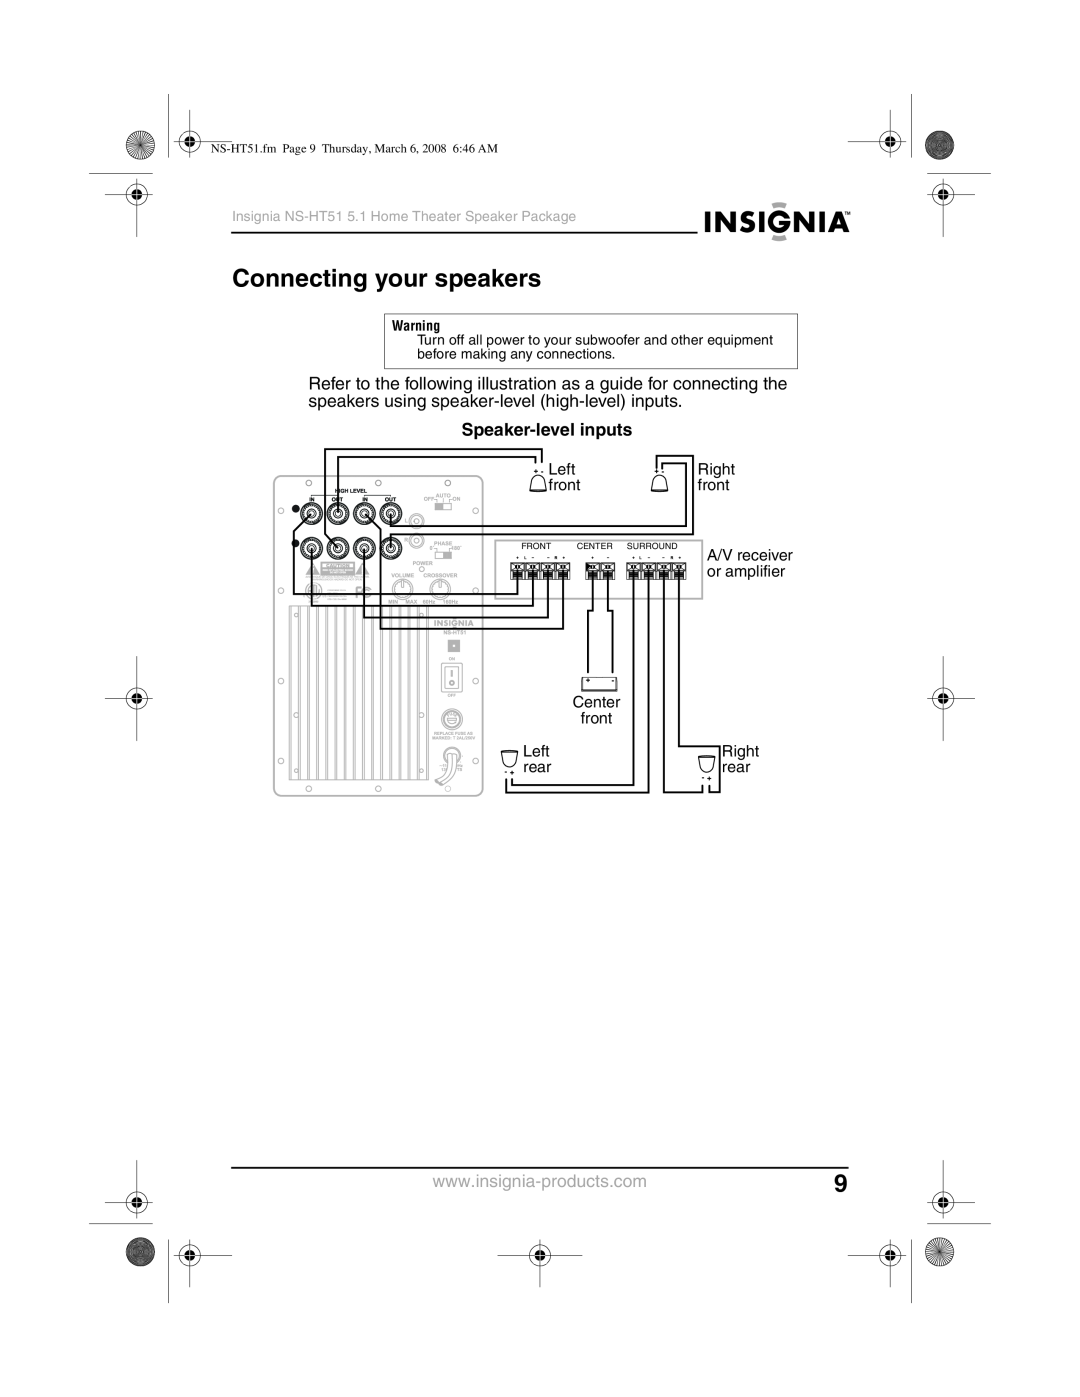 Insignia NS-HT51 manual Connecting your speakers, Speaker-levelinputs 